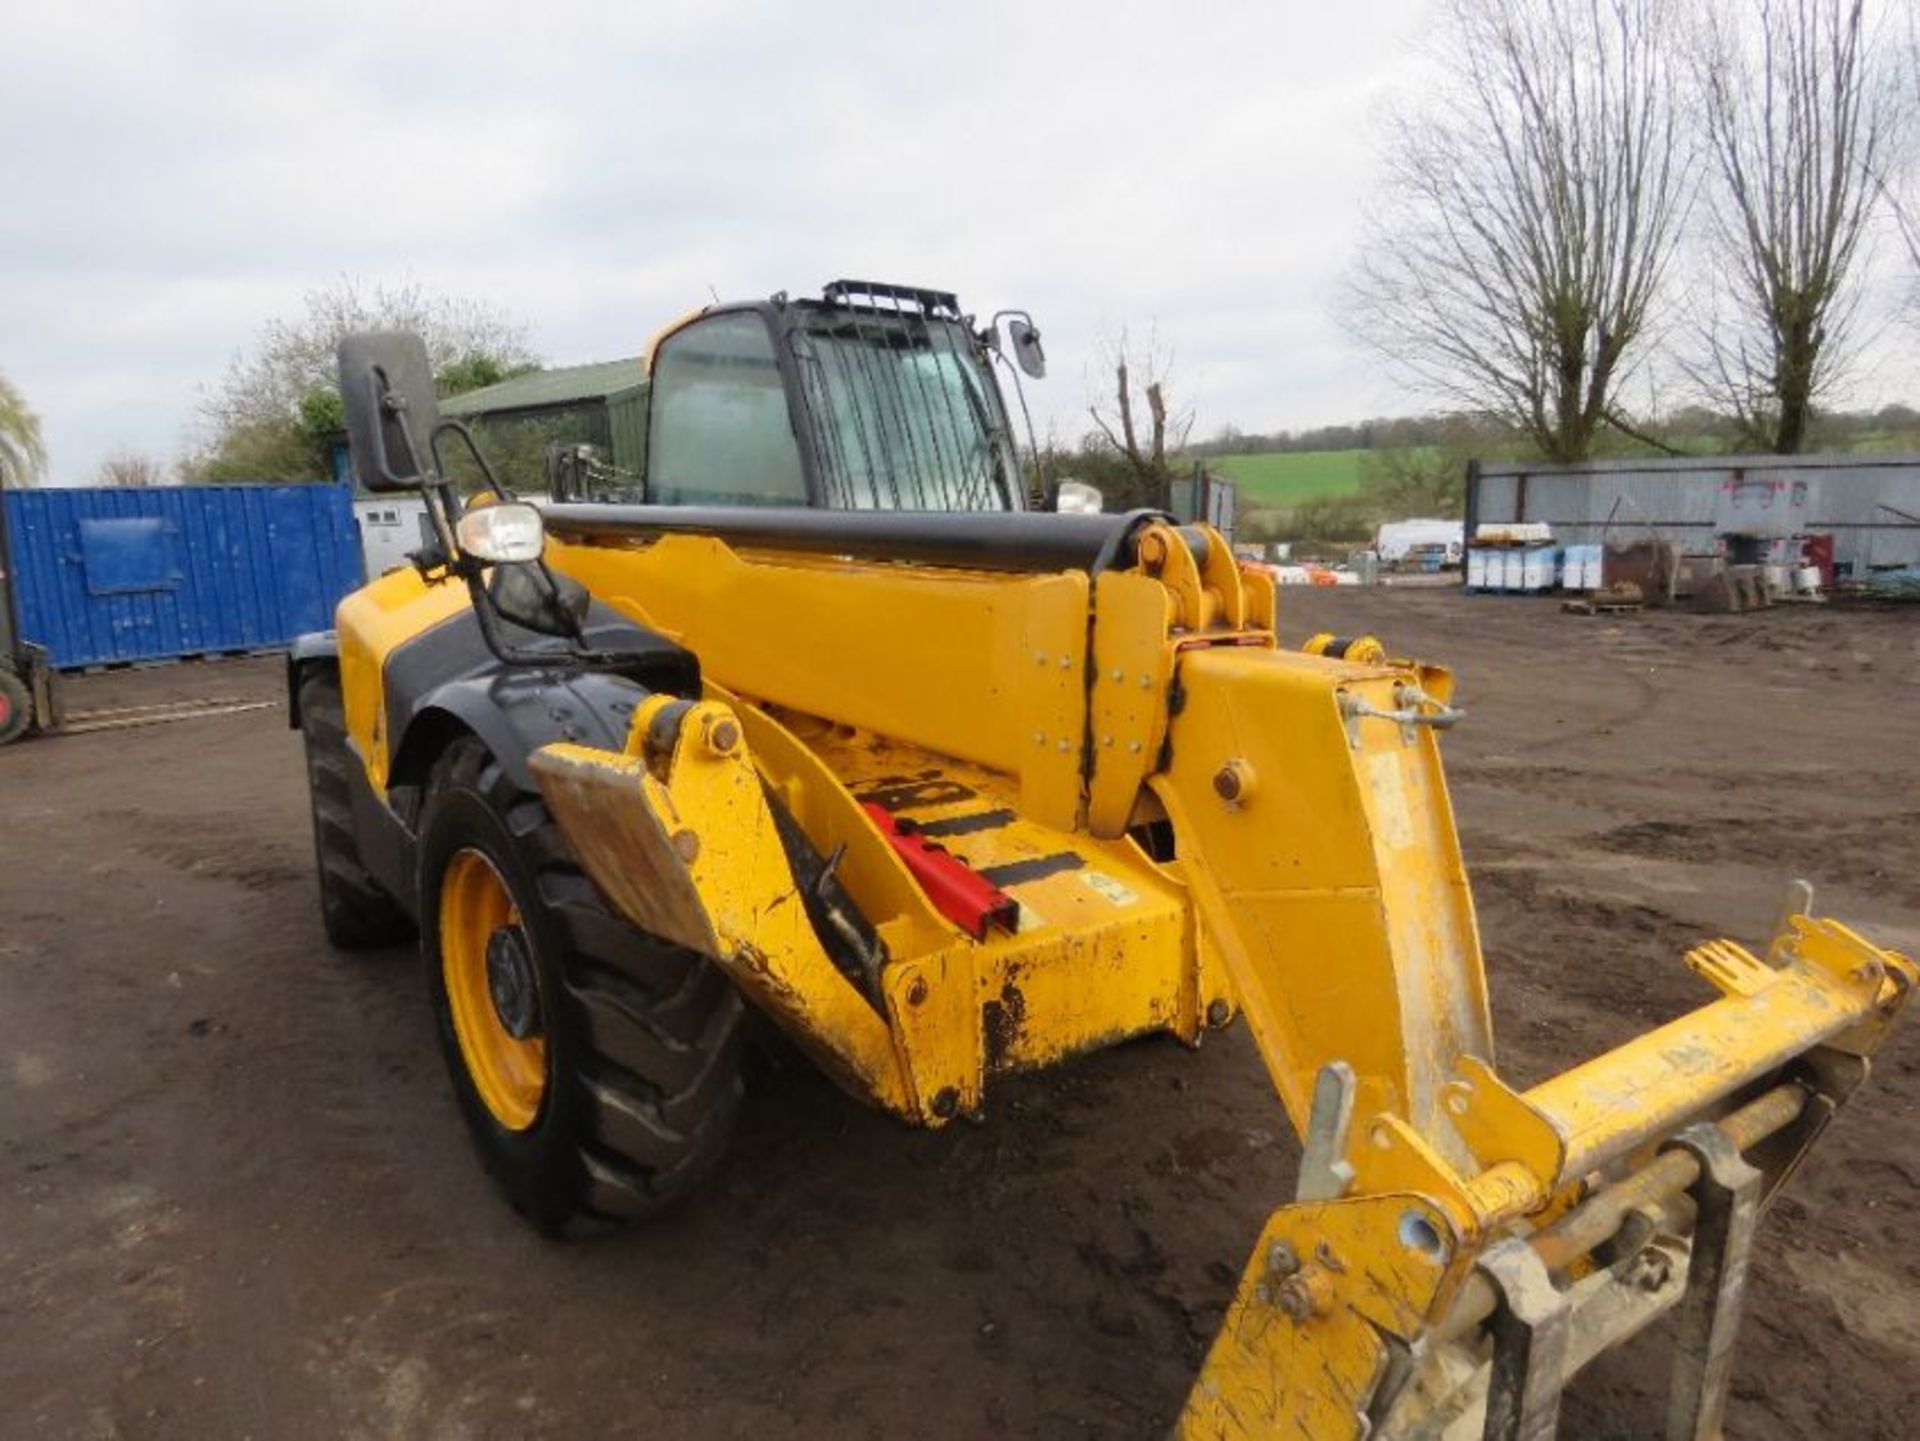 JCB 540-140 TELEHANDLER REG:RV17 YGT WITH V5. 14METRE REACH, 4 TONNE LIFT OWNED FROM NEW BY THE COMP - Image 9 of 23